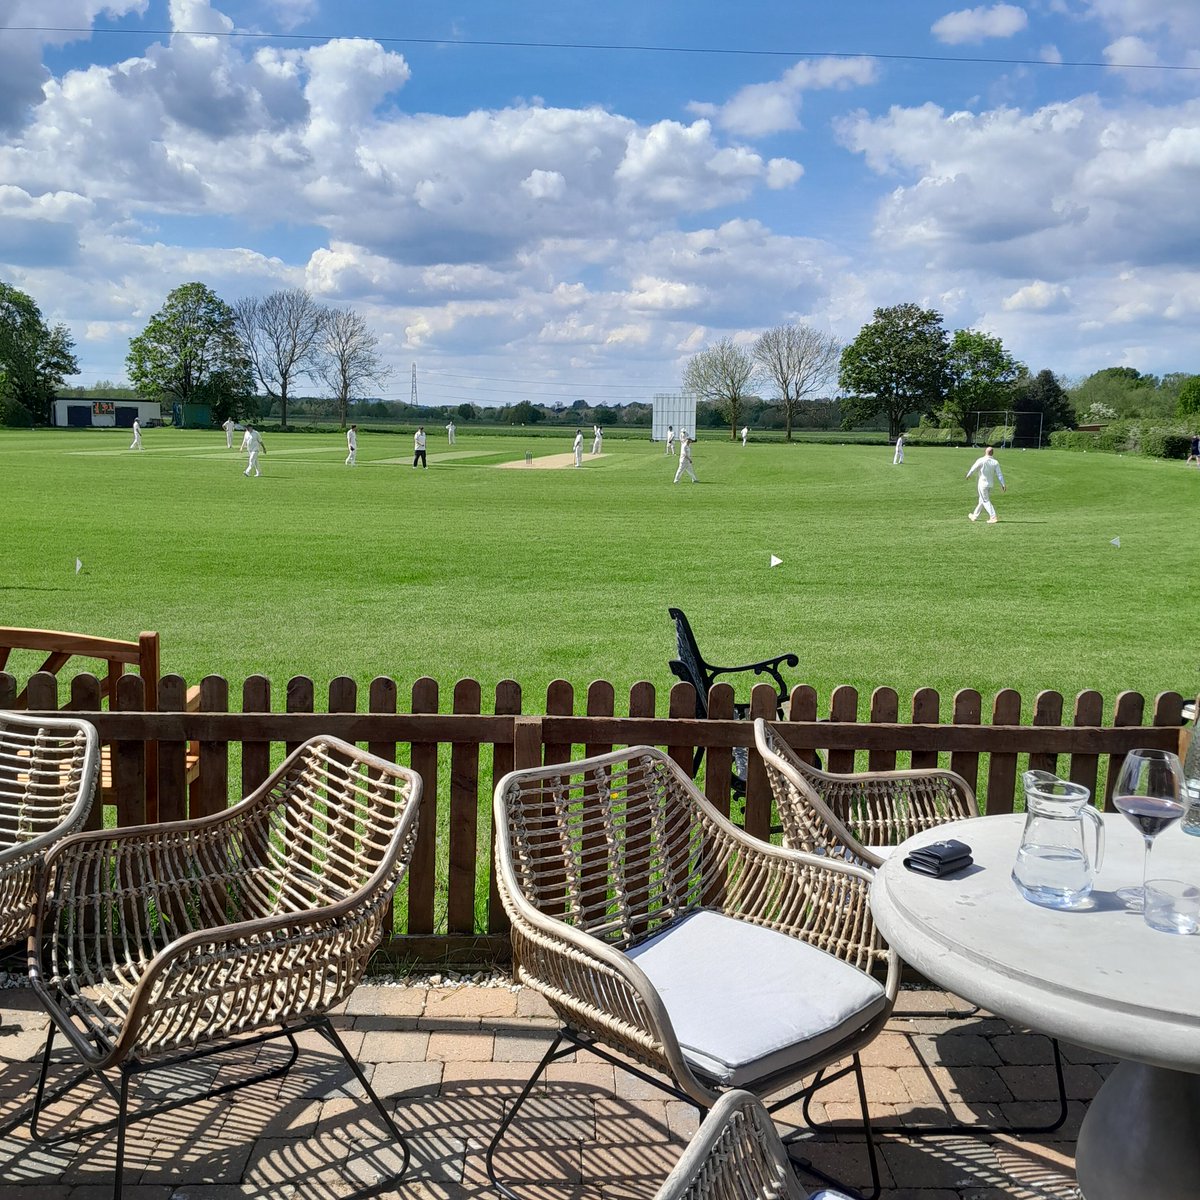 My wife has brought me to a lovely Nottinghamshire village pub for Sunday dinner as a treat for my birthday tomorrow and there is a cricket match being played on the green visible from our table. How very quintessentially English!